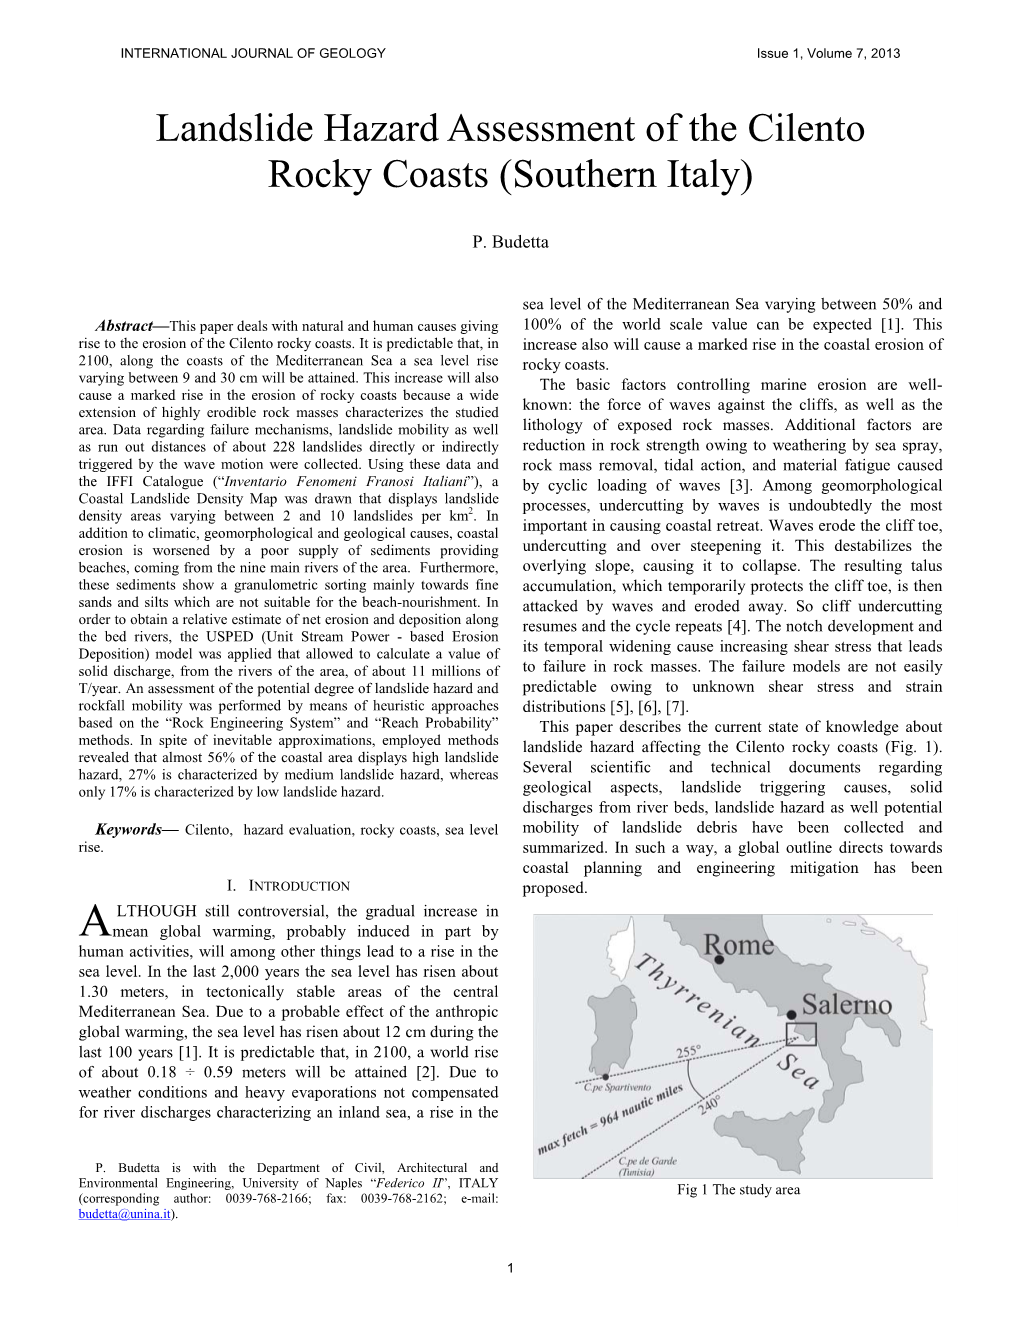 Landslide Hazard Assessment of the Cilento Rocky Coasts (Southern Italy)